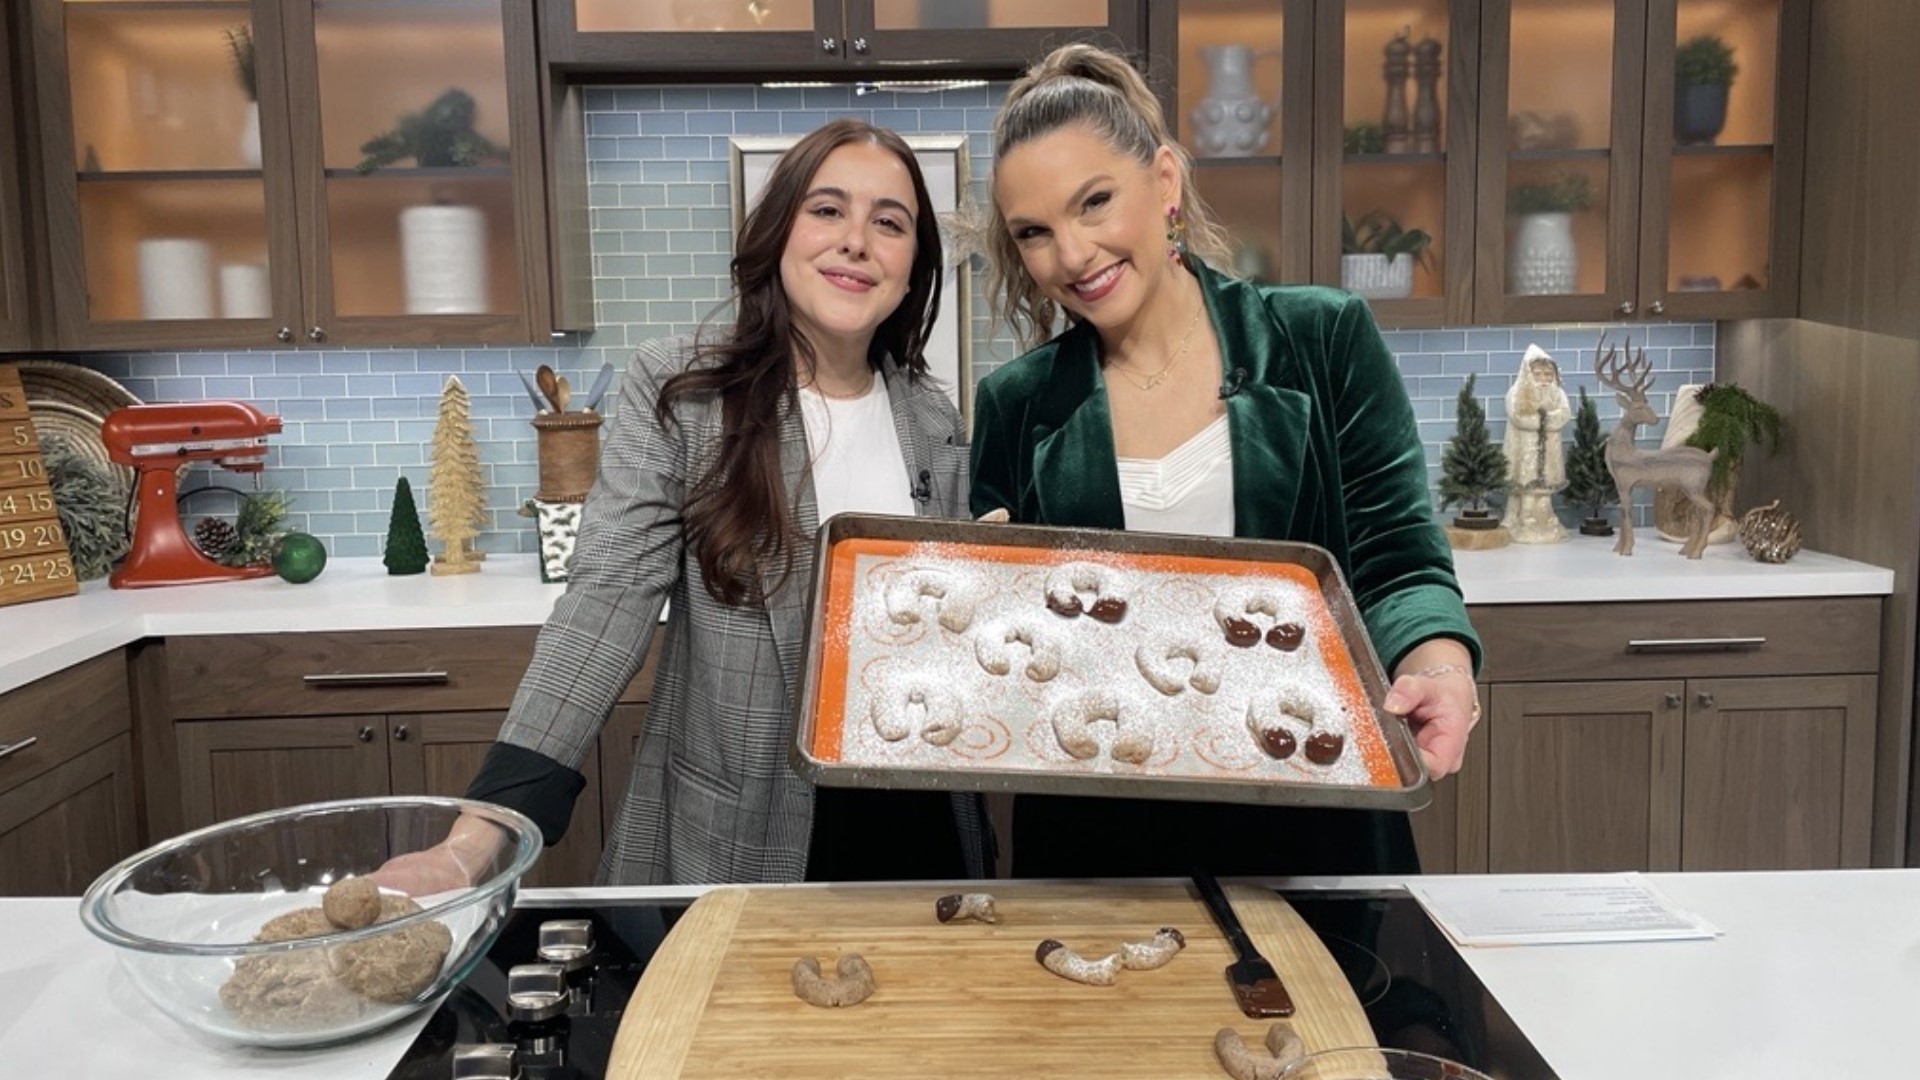 Andrea Pons, author of "Mamacita," shares her recipe for this traditional Mexican Christmas cookie from her childhood. #newdaynw